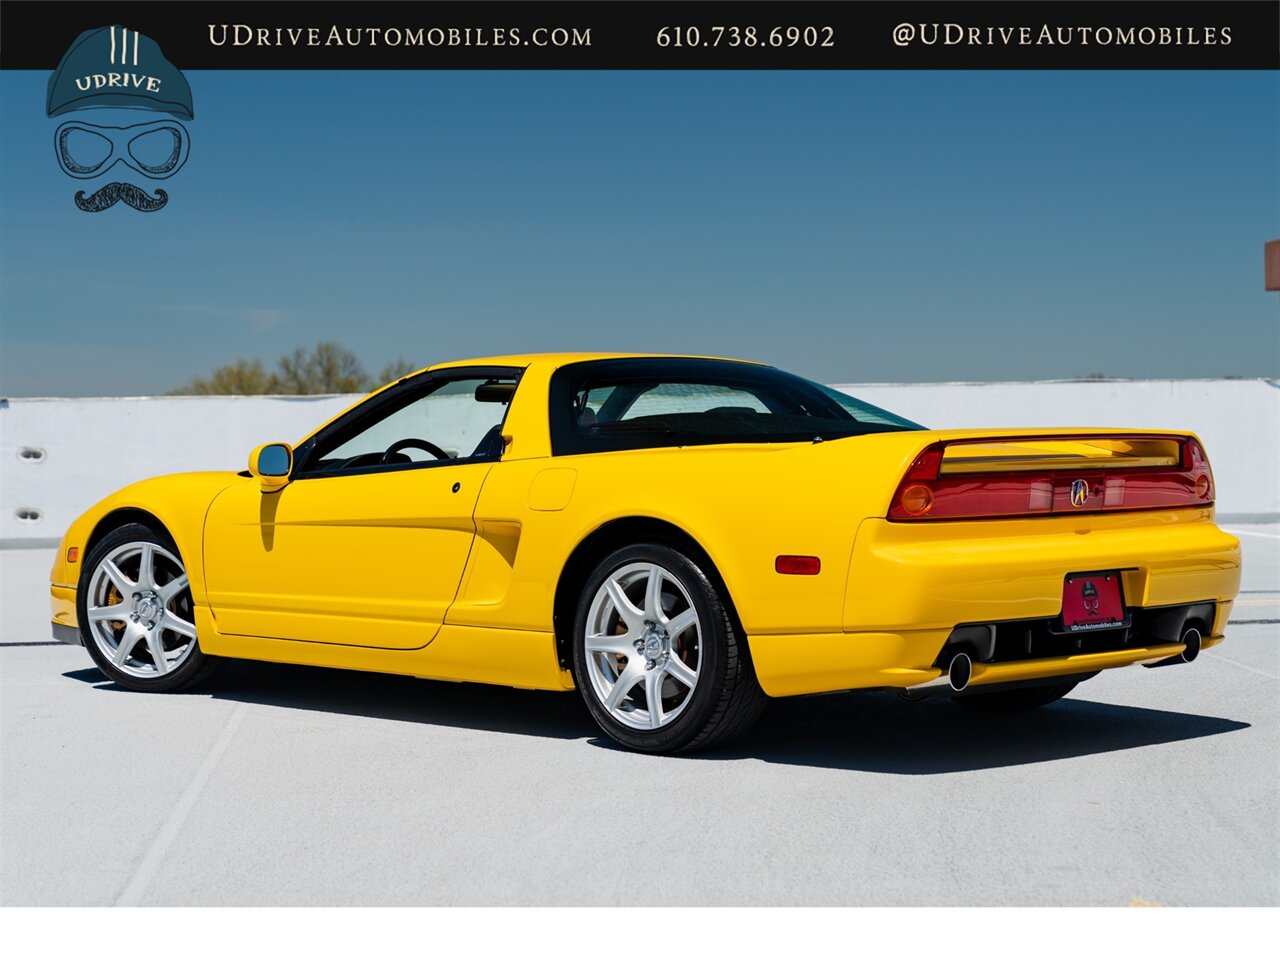 2003 Acura NSX NSX-T  Spa Yellow over Yellow Lthr 1 of 13 Produced - Photo 4 - West Chester, PA 19382